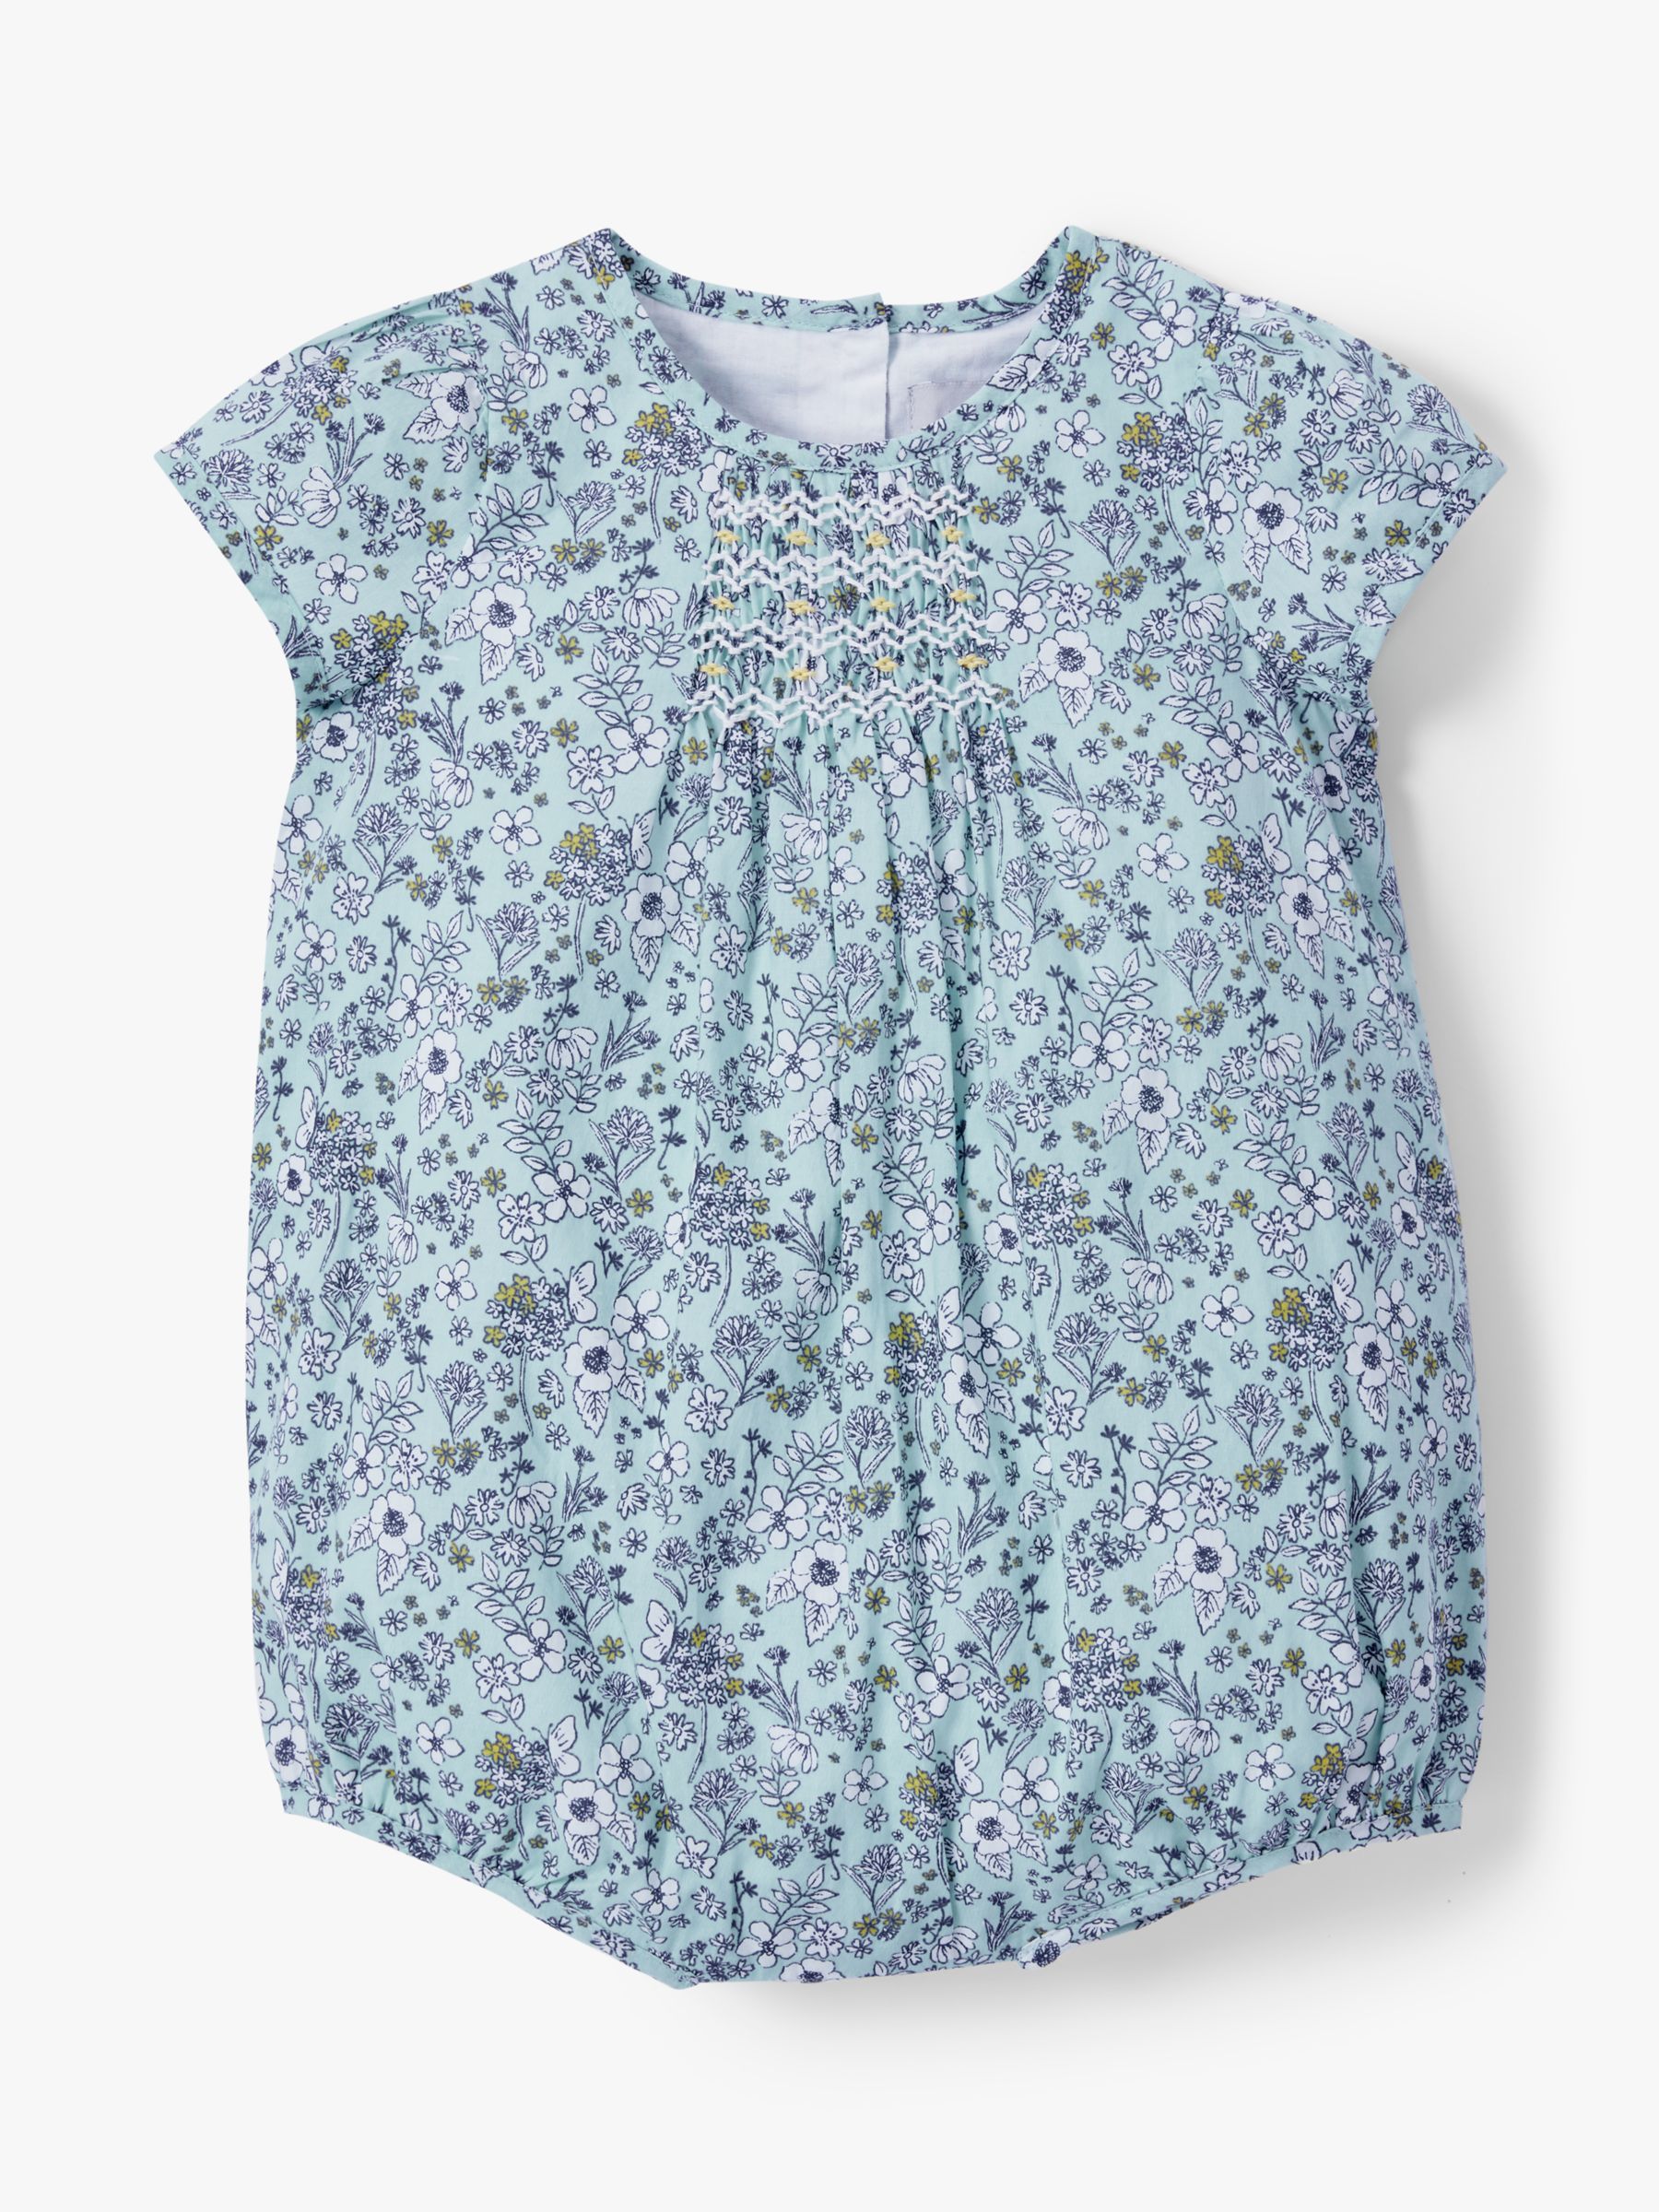 John Lewis & Partners Heirloom Collection Baby Ditsy Floral Romper, Blue